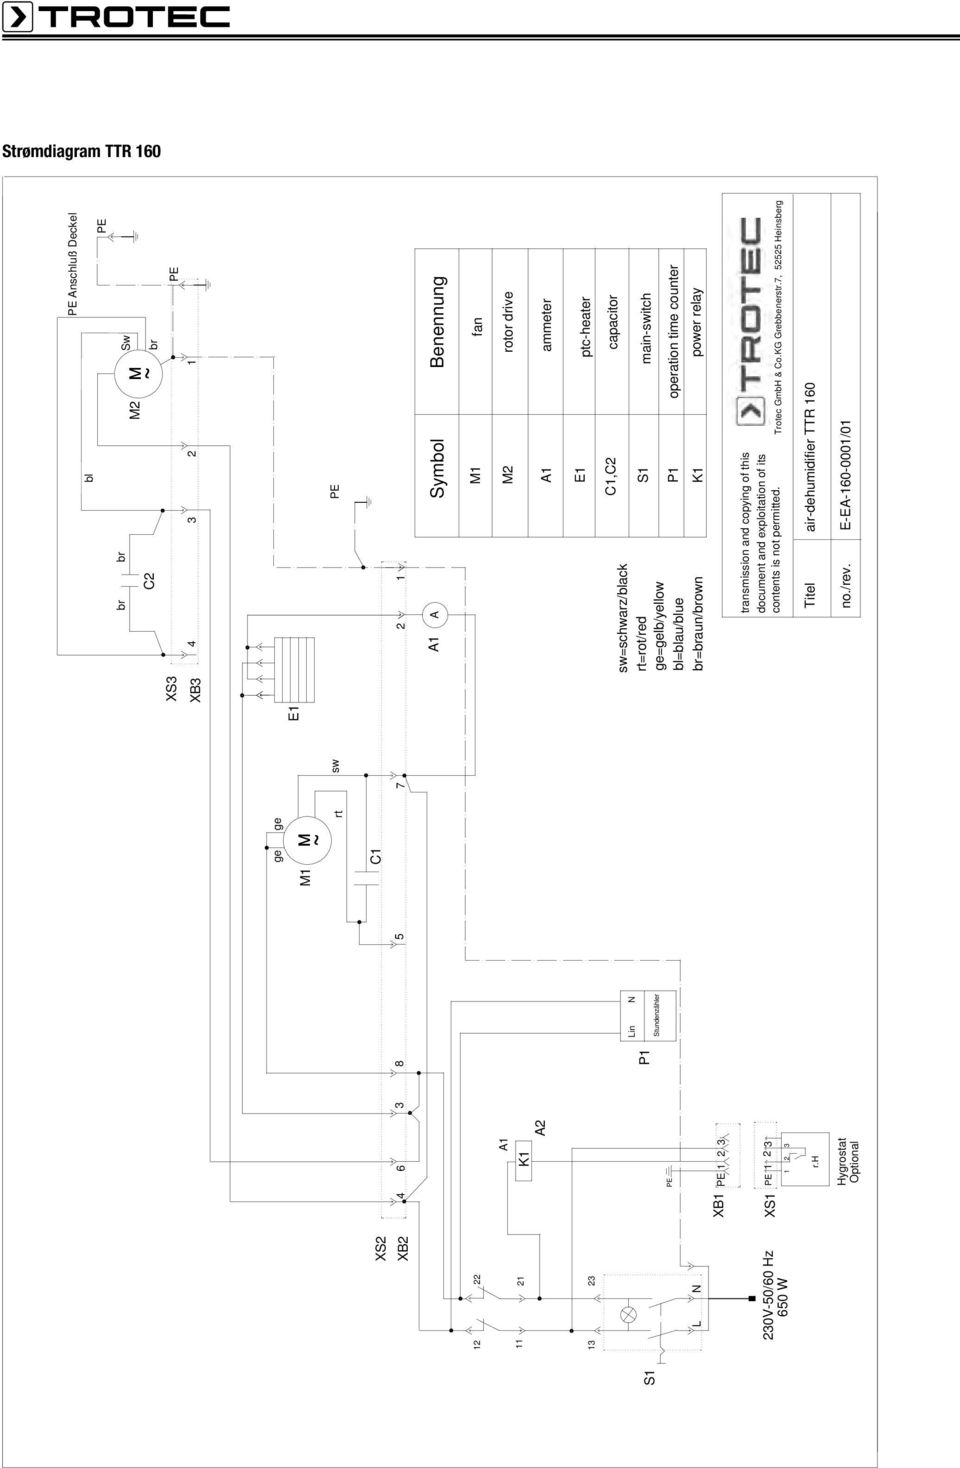 bl=blau/blue br=braun/brown C1,C2 S1 capacitor main-switch P1 operation time counter K1 power relay XS1 1 2 3 1 2 3 transmission and copying of this document and